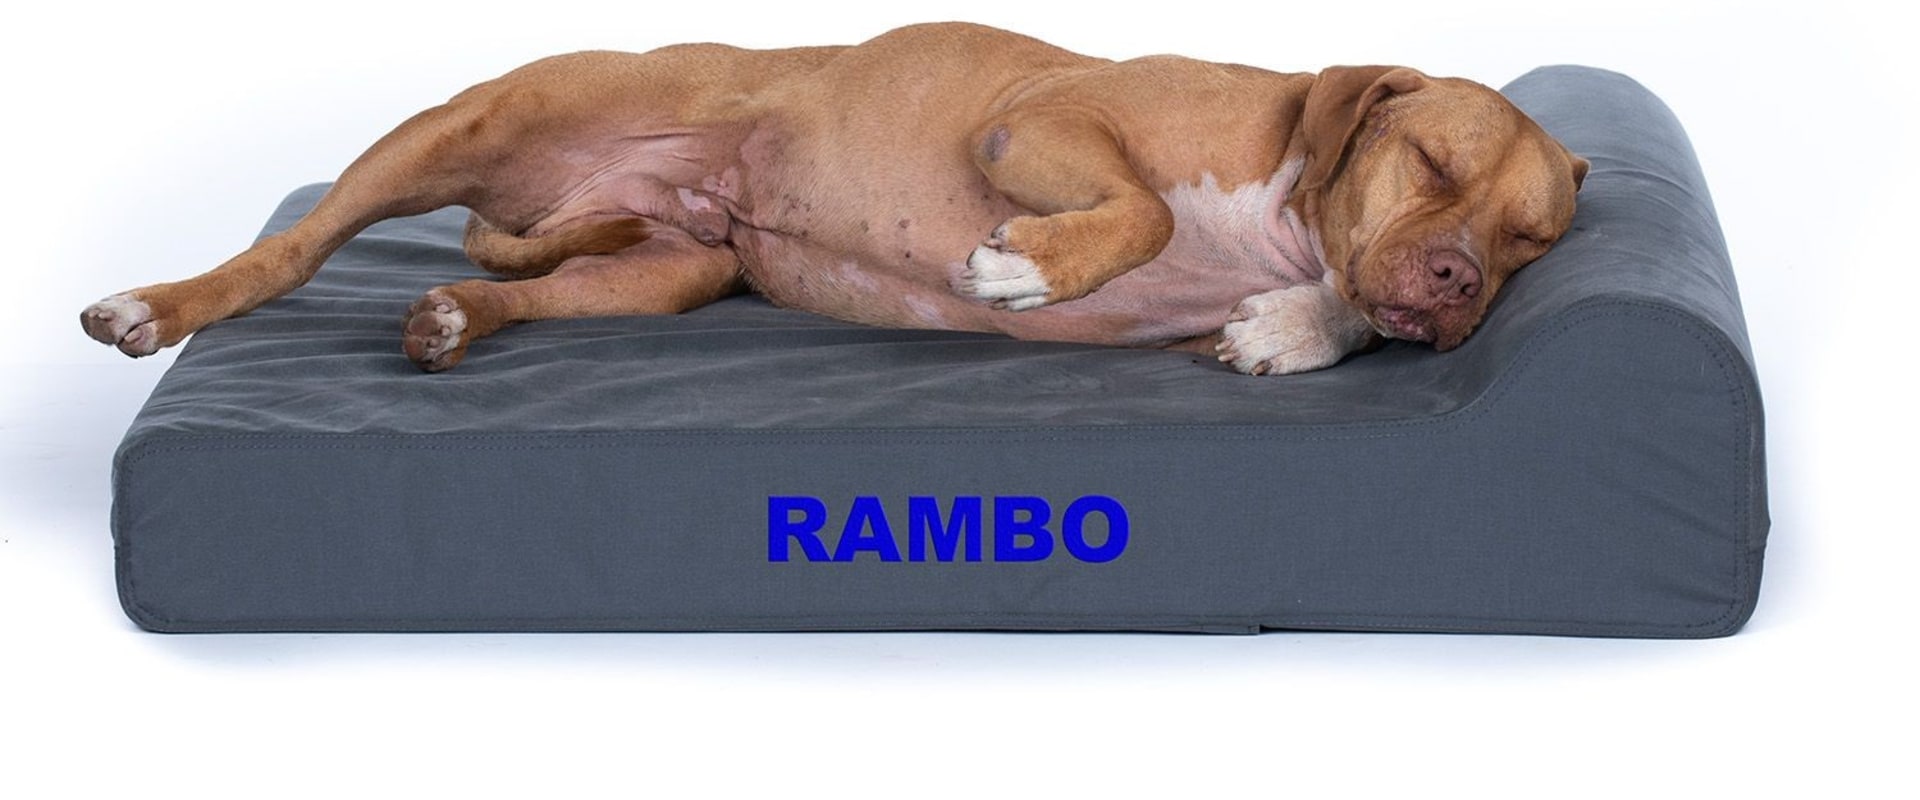 Are Orthopedic Beds Good for Dogs?